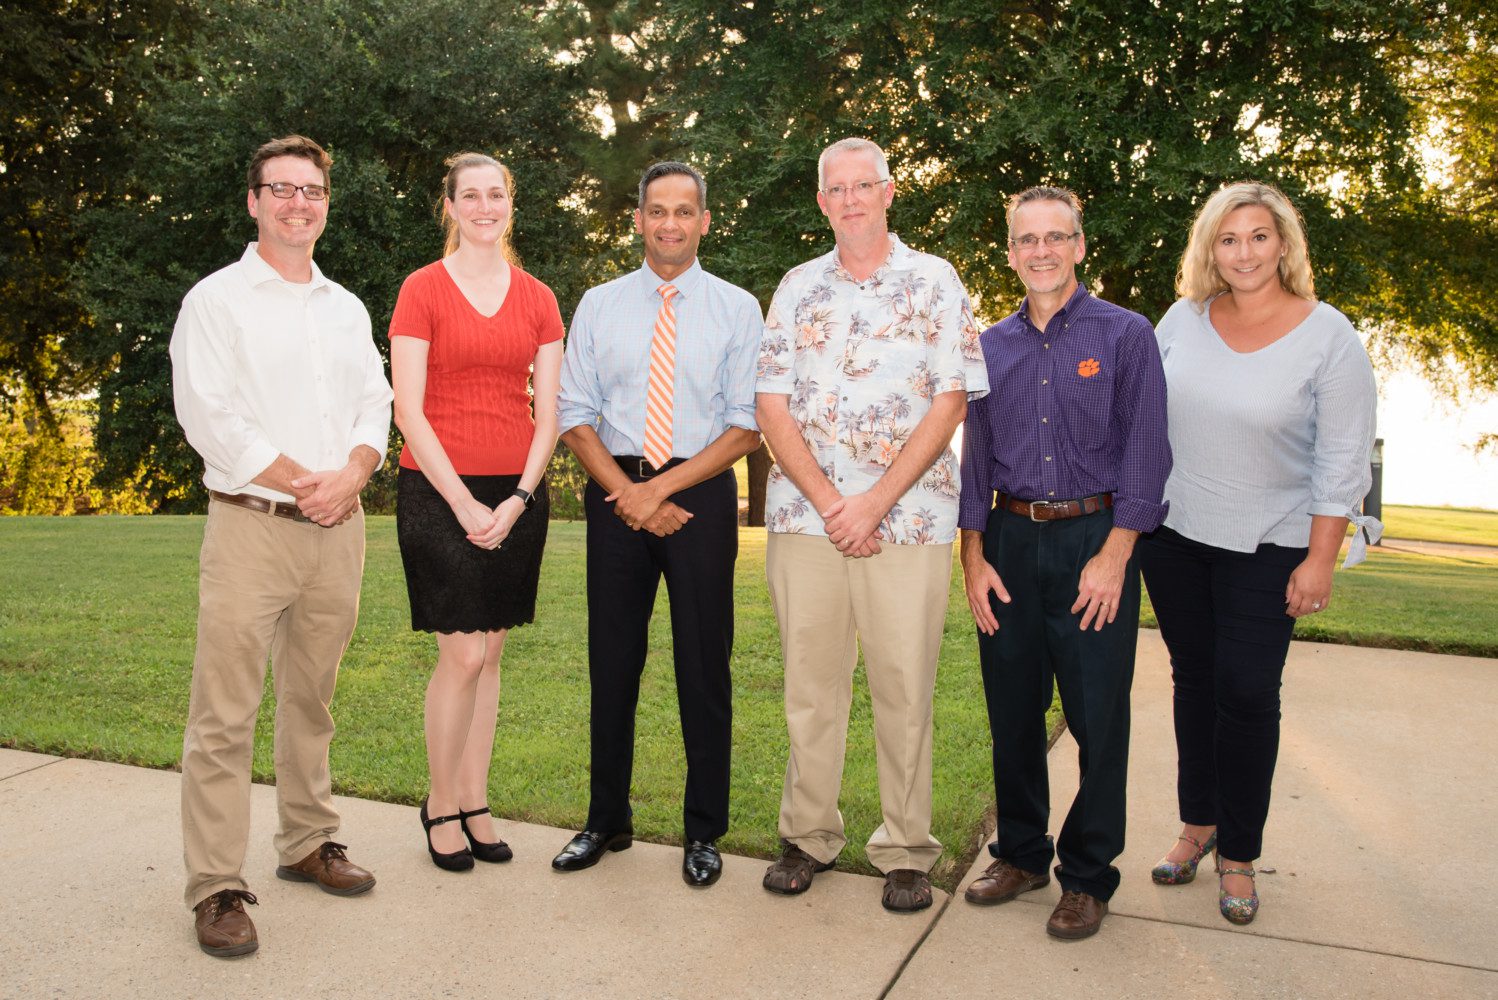 Award winners posed for a photo with Anand Gramopadhye, dean of the College of Engineering, Computing and Applied Sciences. Those pictured are (from left): Brian Powell, Delphine Dean, Gramopadhye, Joshua Summers, Kevin Taaffe, and Ashley Childers. Not pictured are Kyle Brinkman and Lawrence Fredendall.